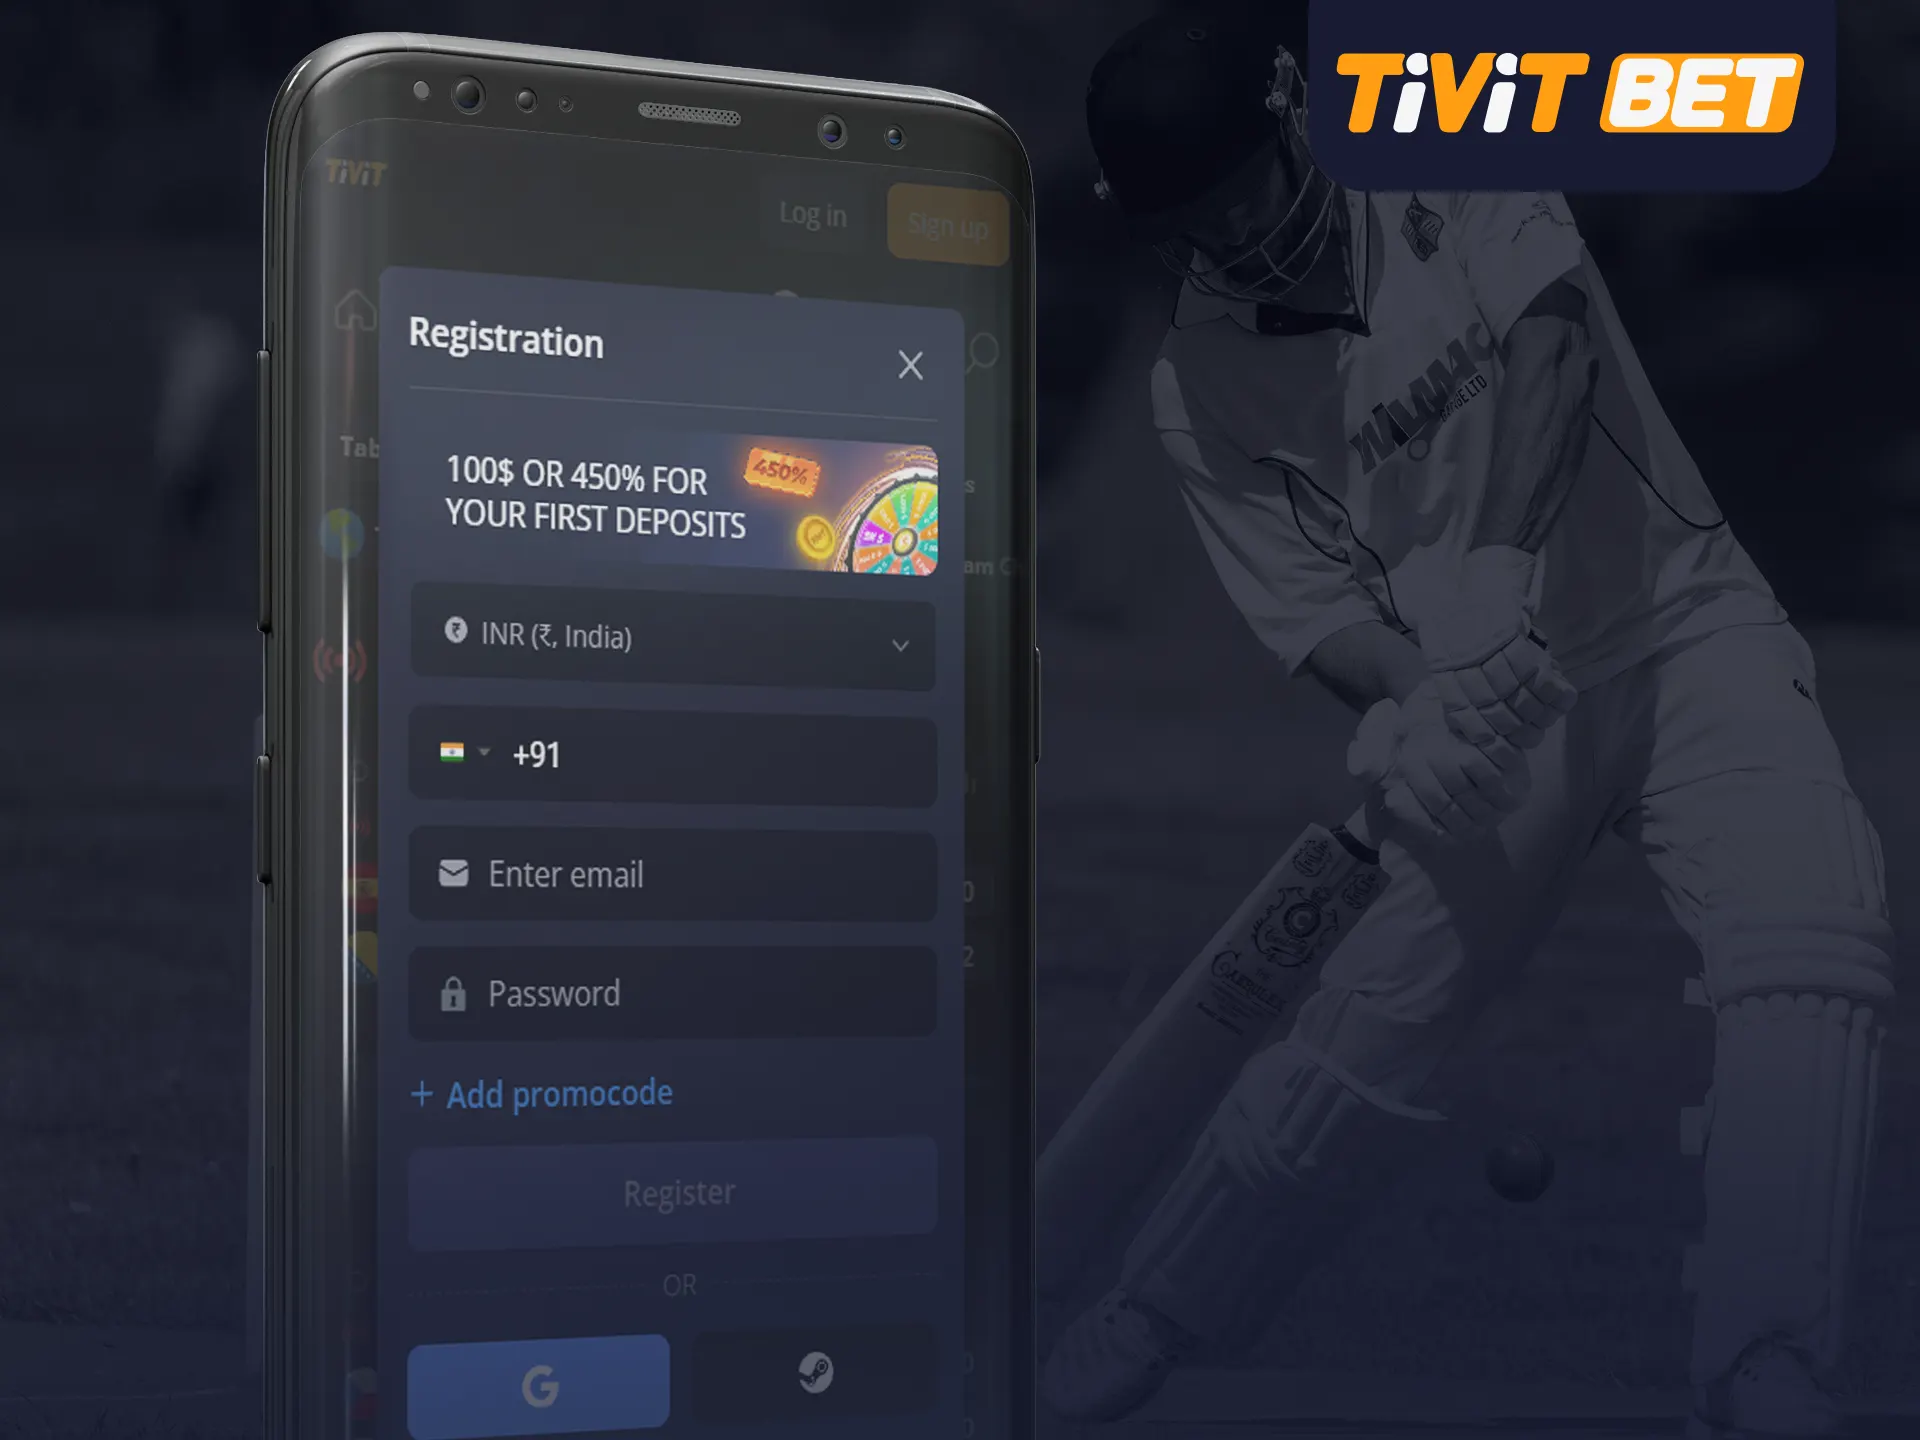 Use the instructions to register in the Tivit bet app.